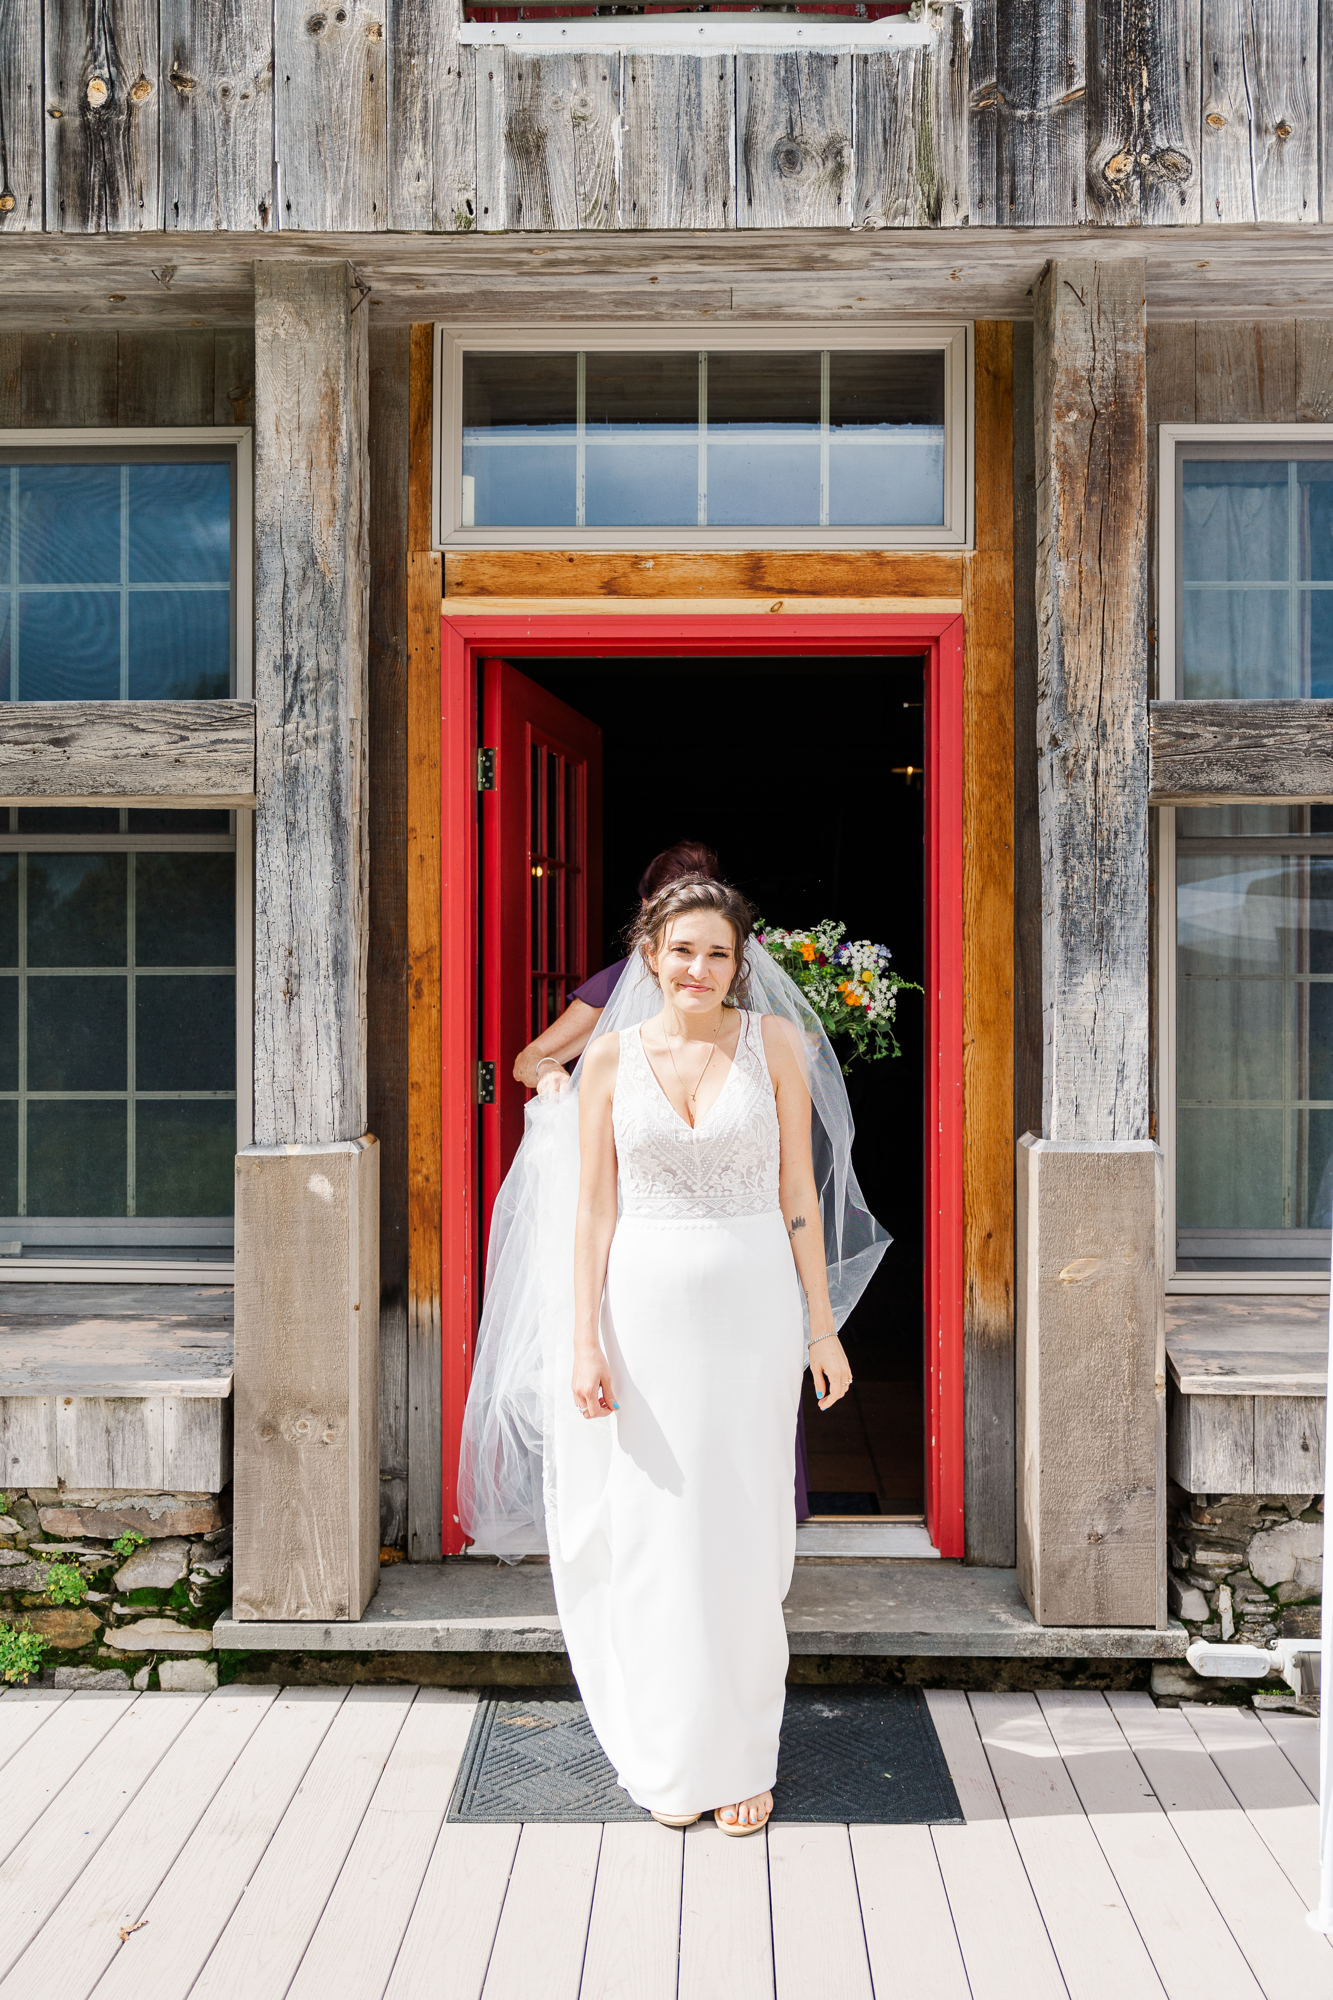 Remarkable Upstate Wedding Photos at Cristman Barn in Ilion, New York